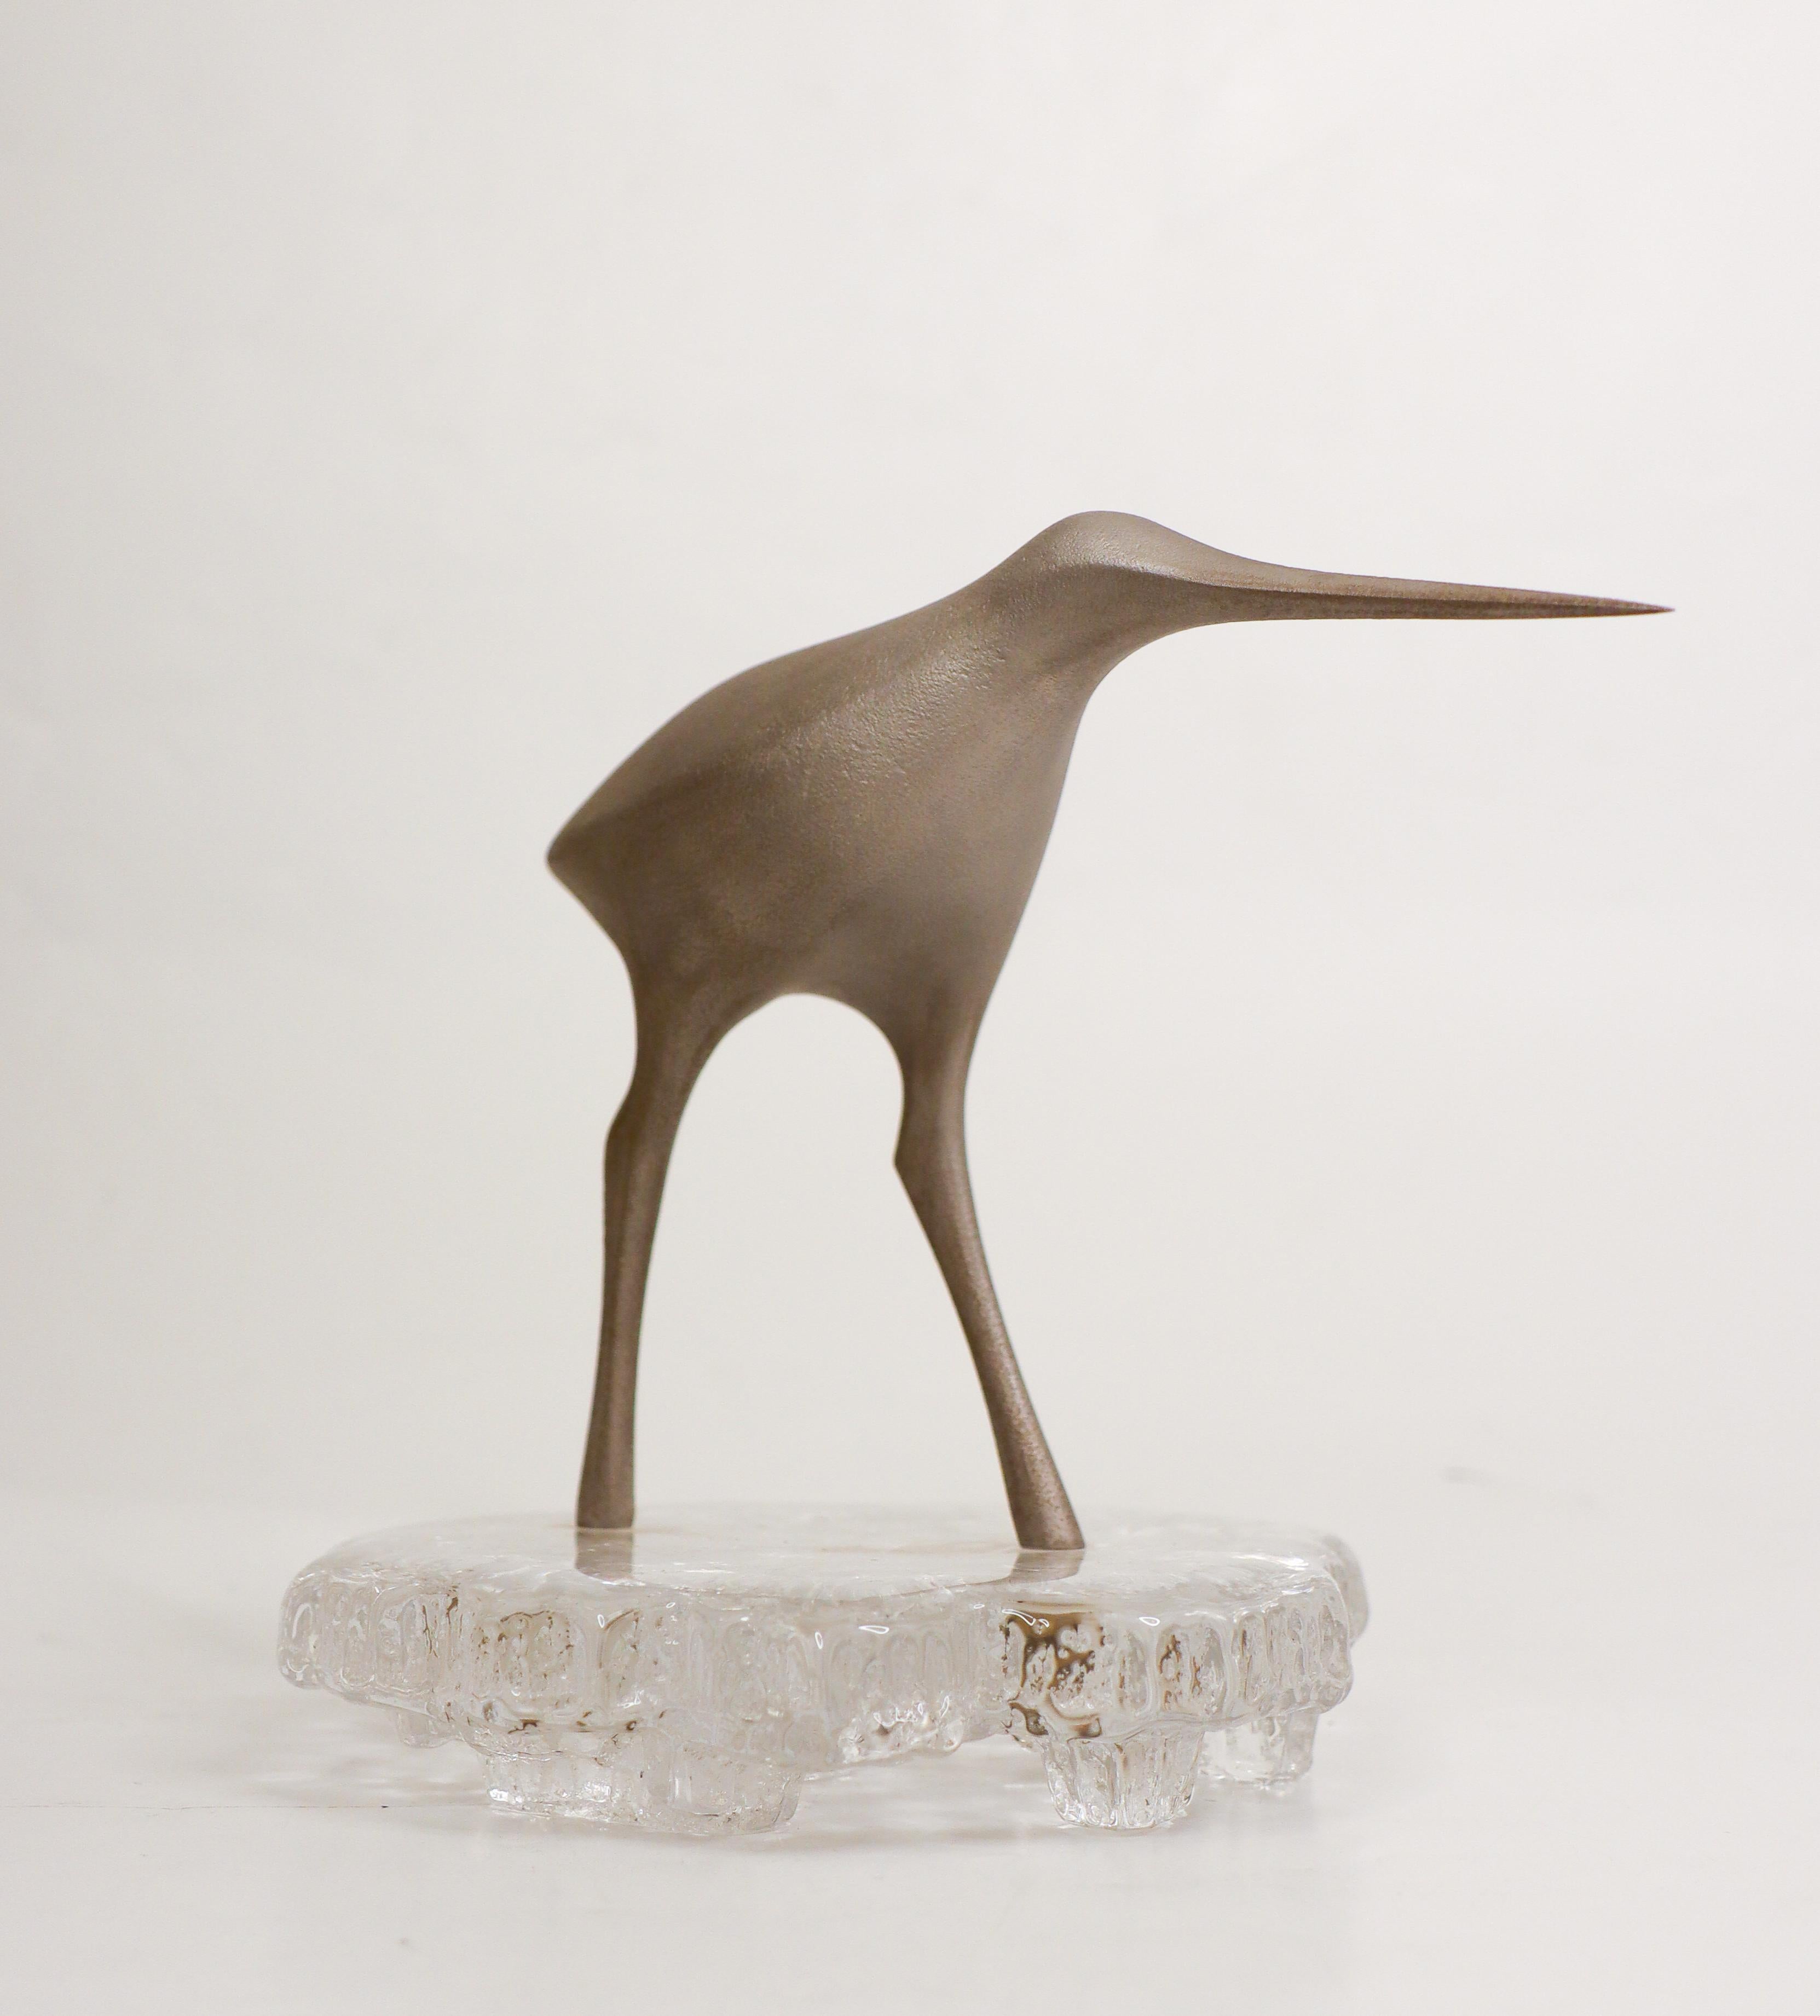 A lovely Bird sculpture by Tapio Wirkkala. It is made in metal with a base in glass, it is 15.5 cm high (6.2